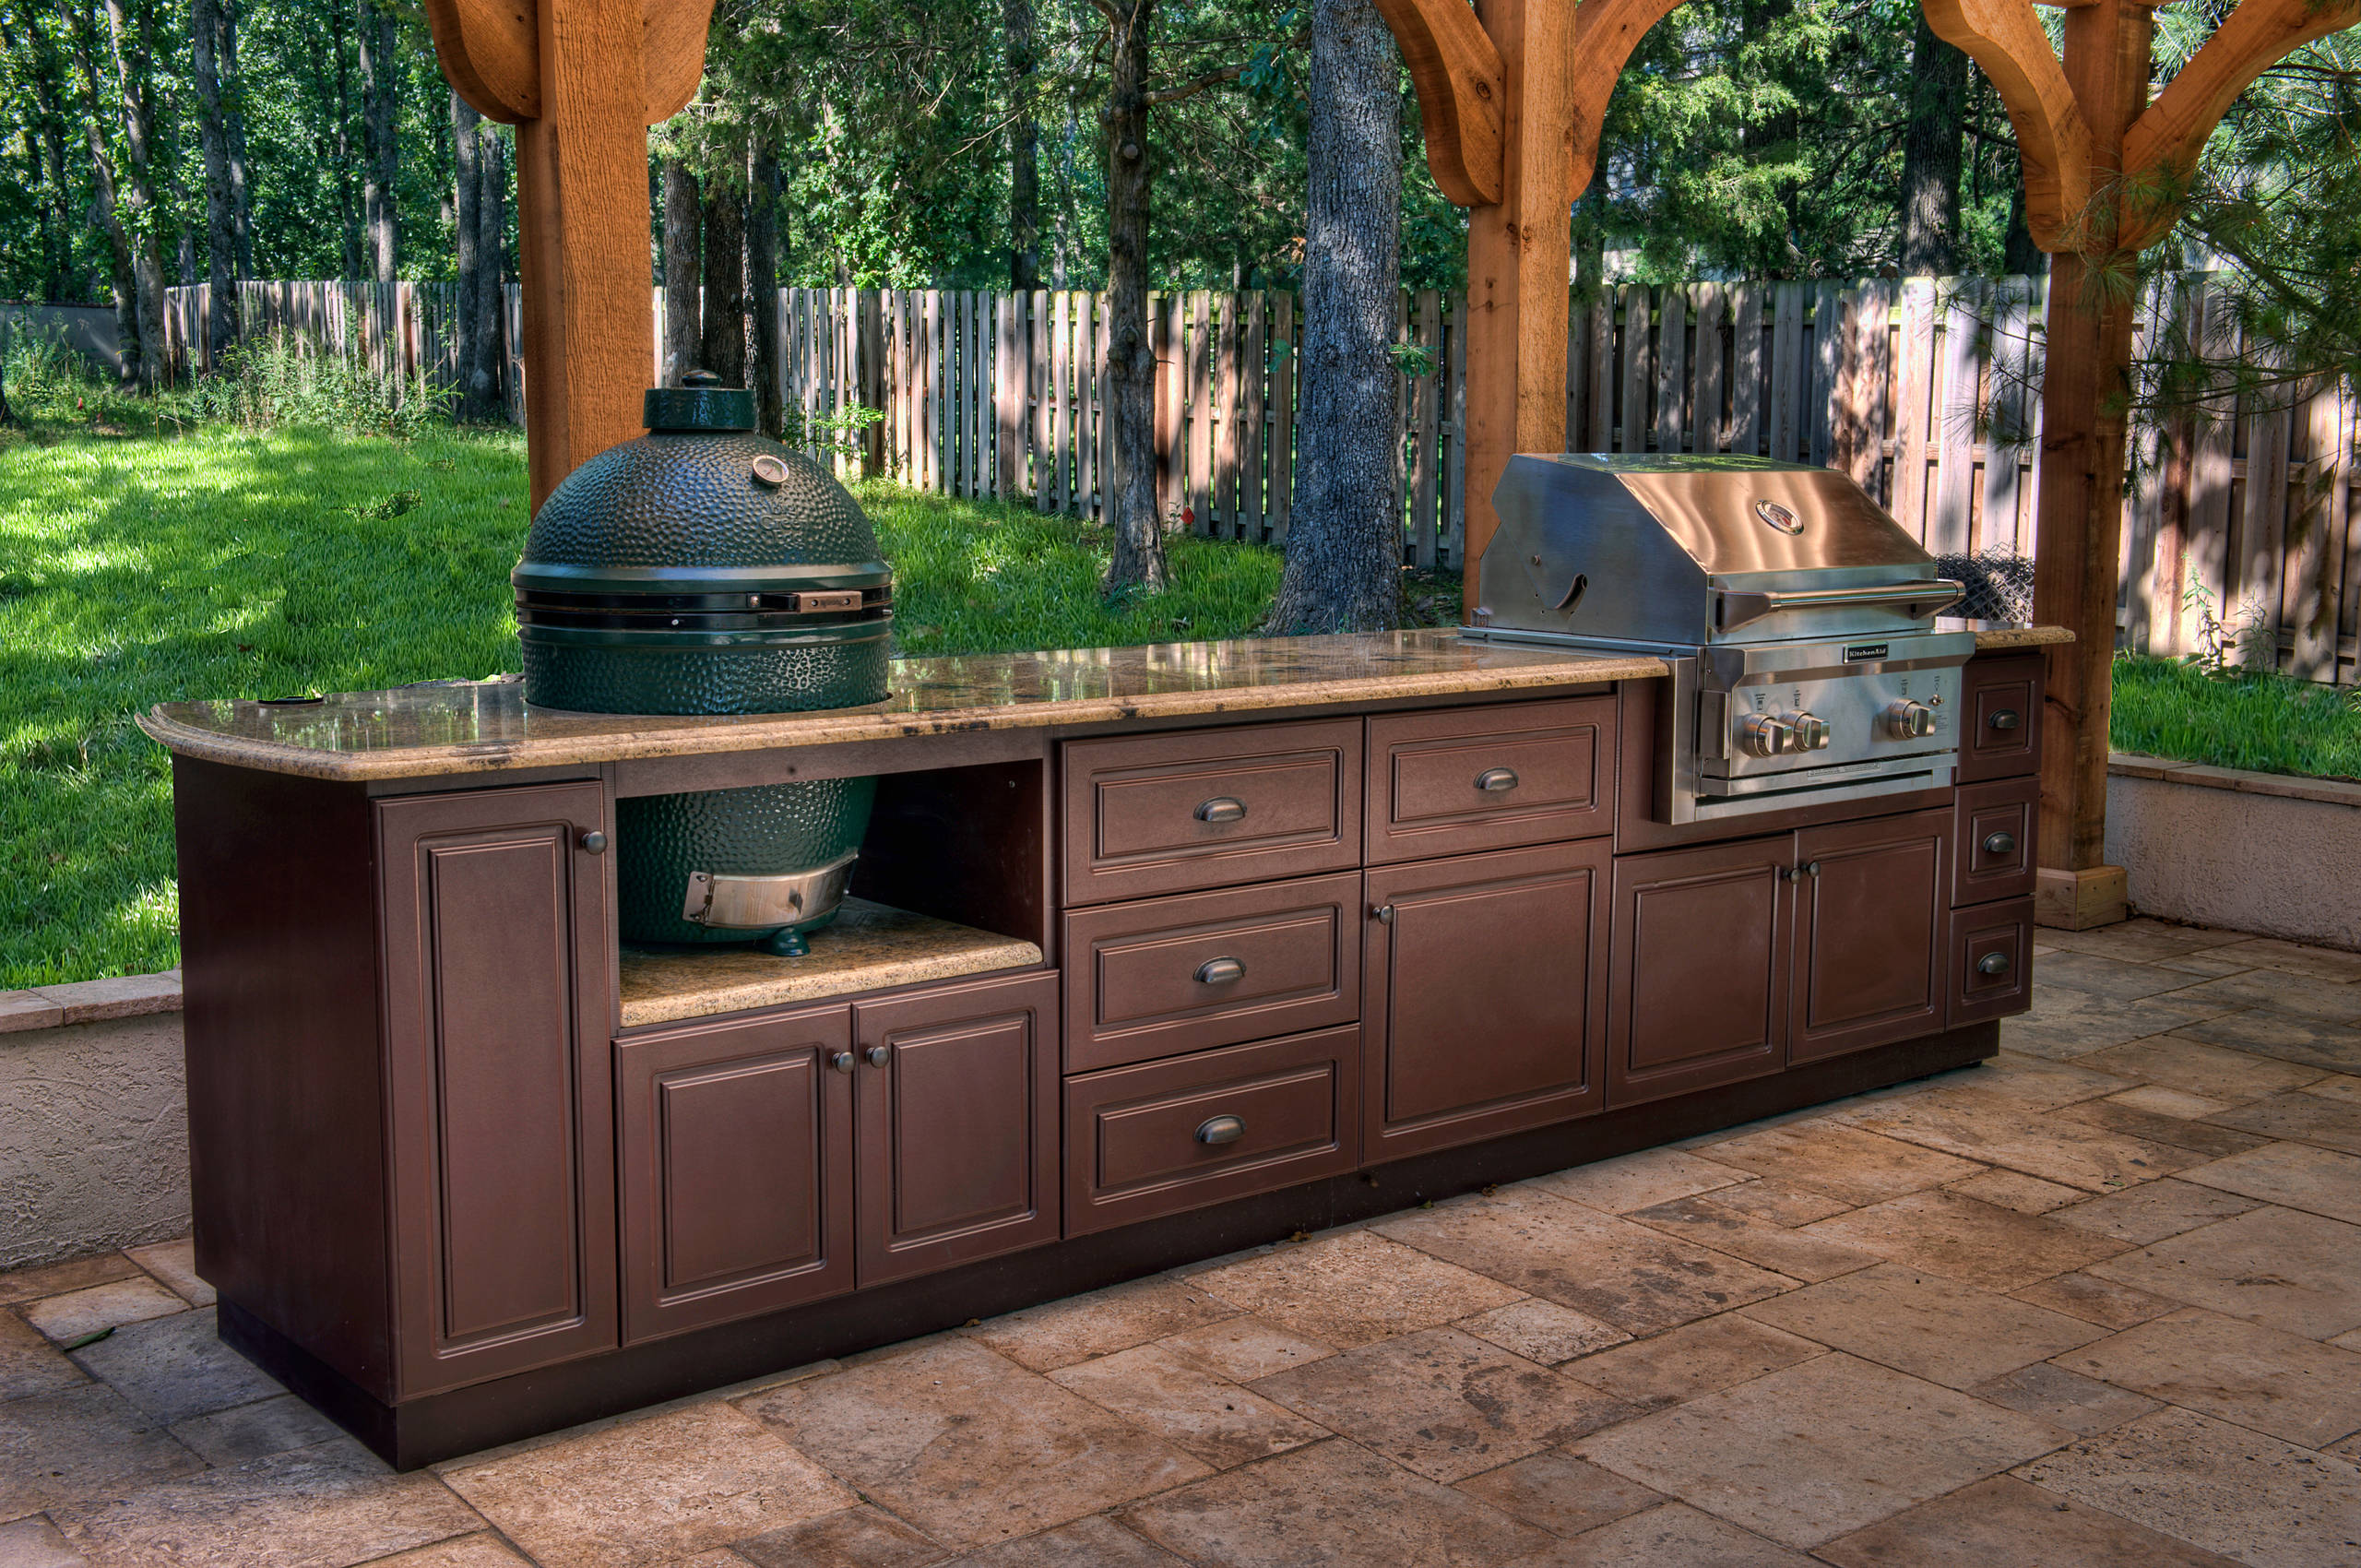 Select Outdoor Kitchen Custom Cabinets Select Outdoor Kitchens Img~6251a0e7030f77ac 14 7968 1 31c77df 